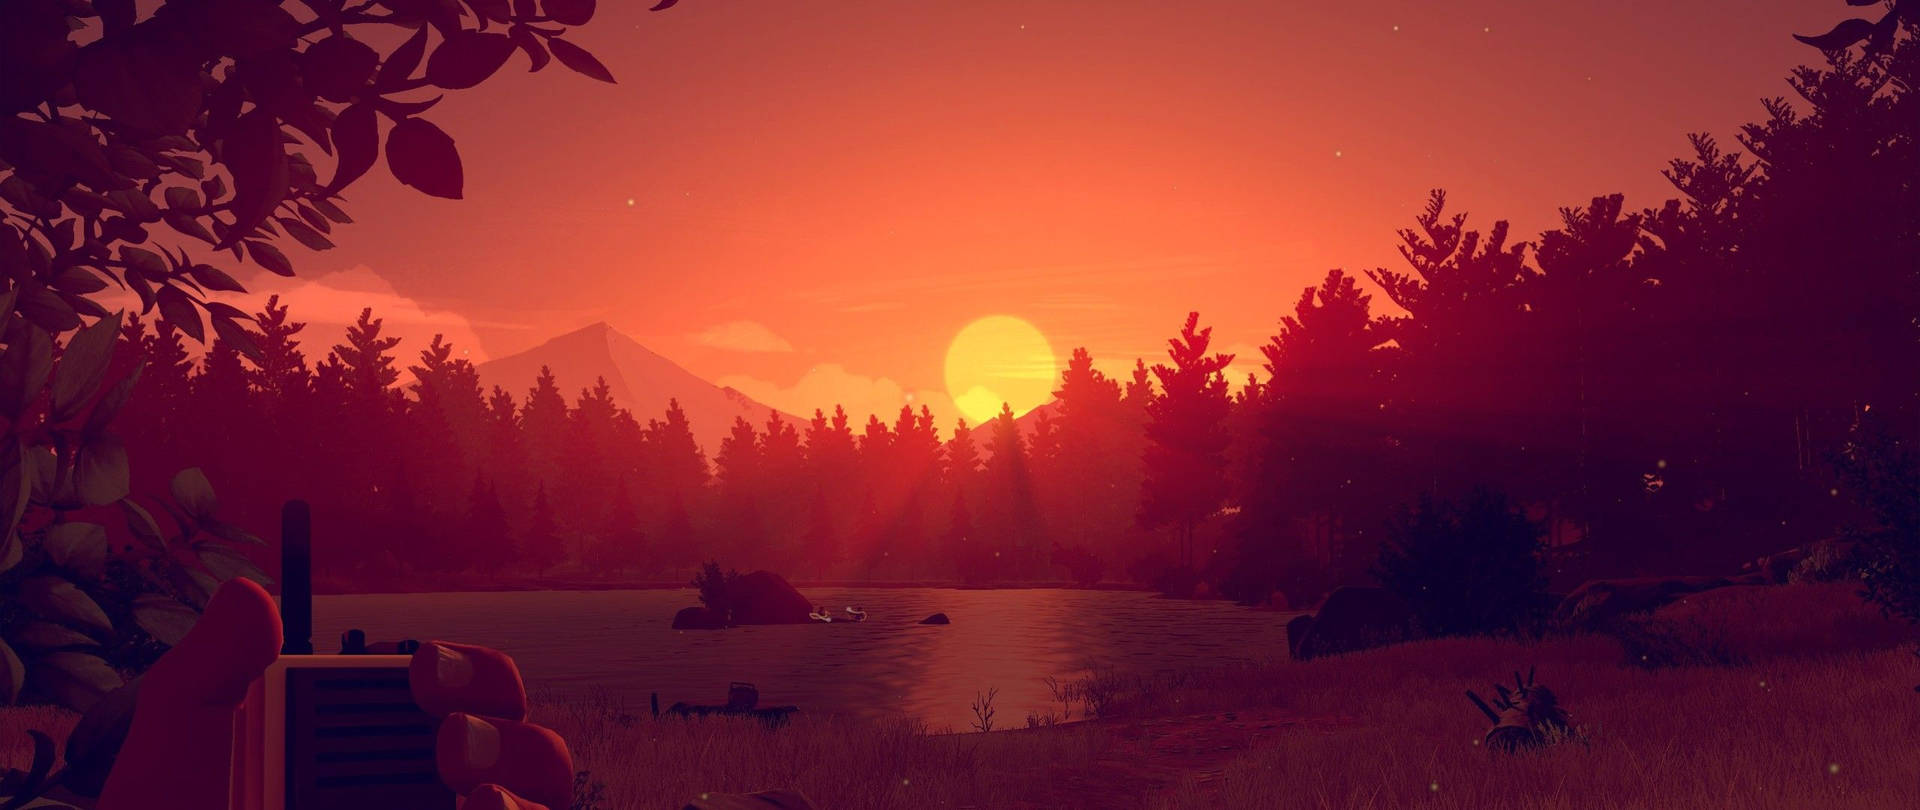 Breathtaking Animated Sunset in a Lush Green Forest Wallpaper